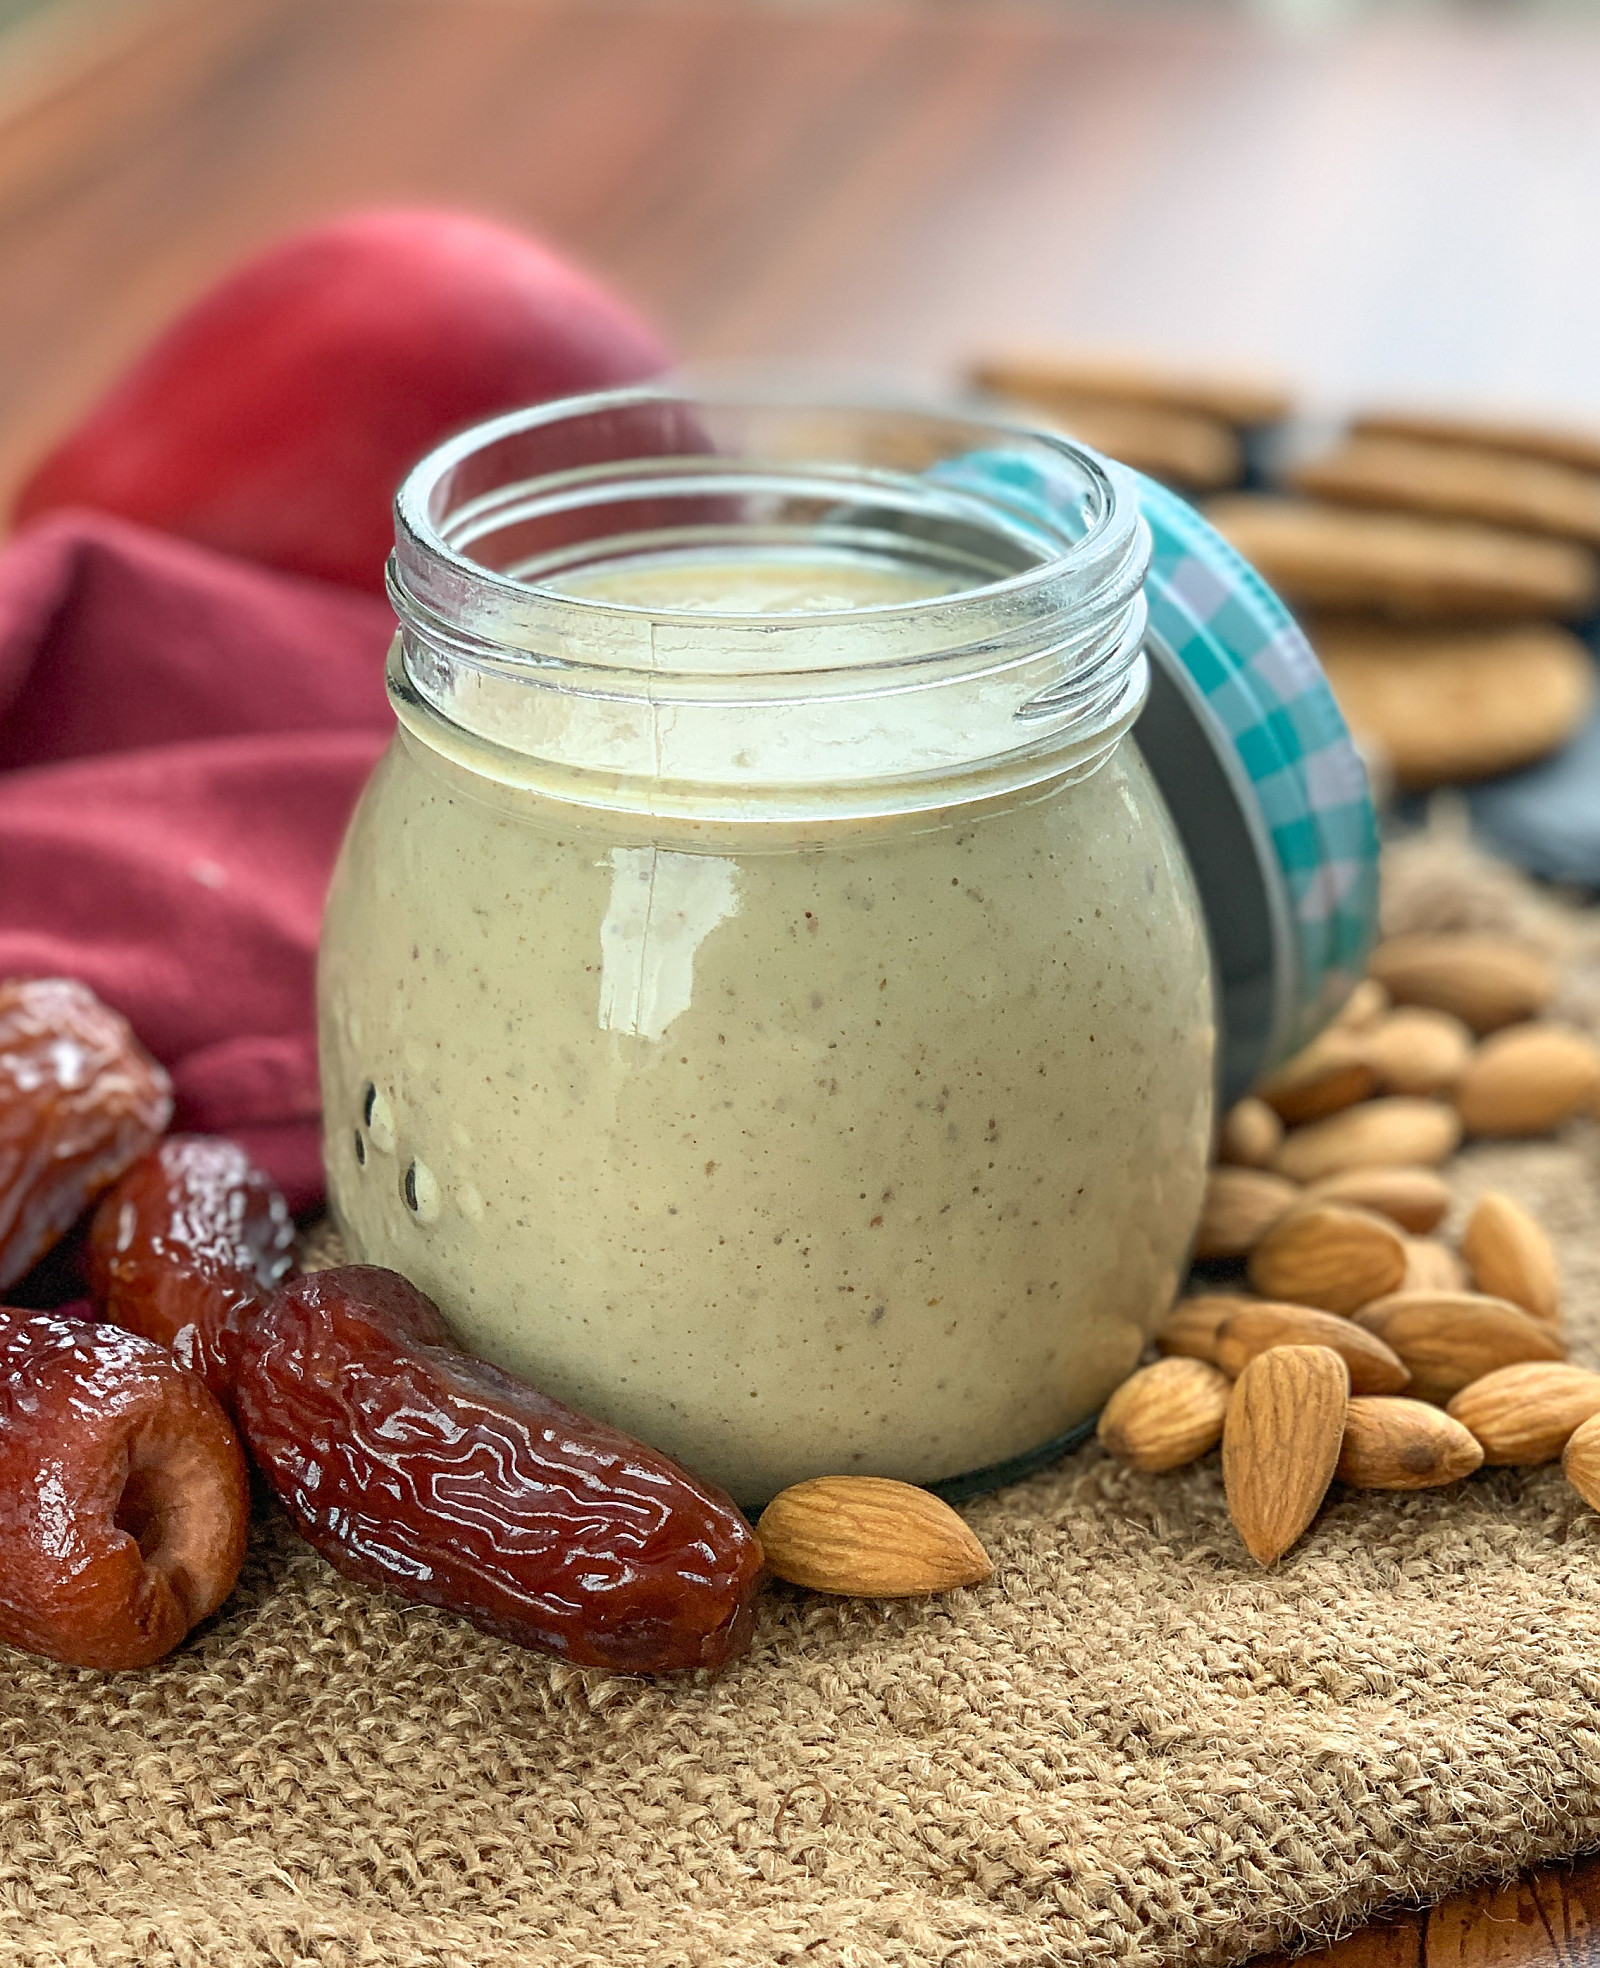 Oats Almond Apple Date Smoothie Recipe